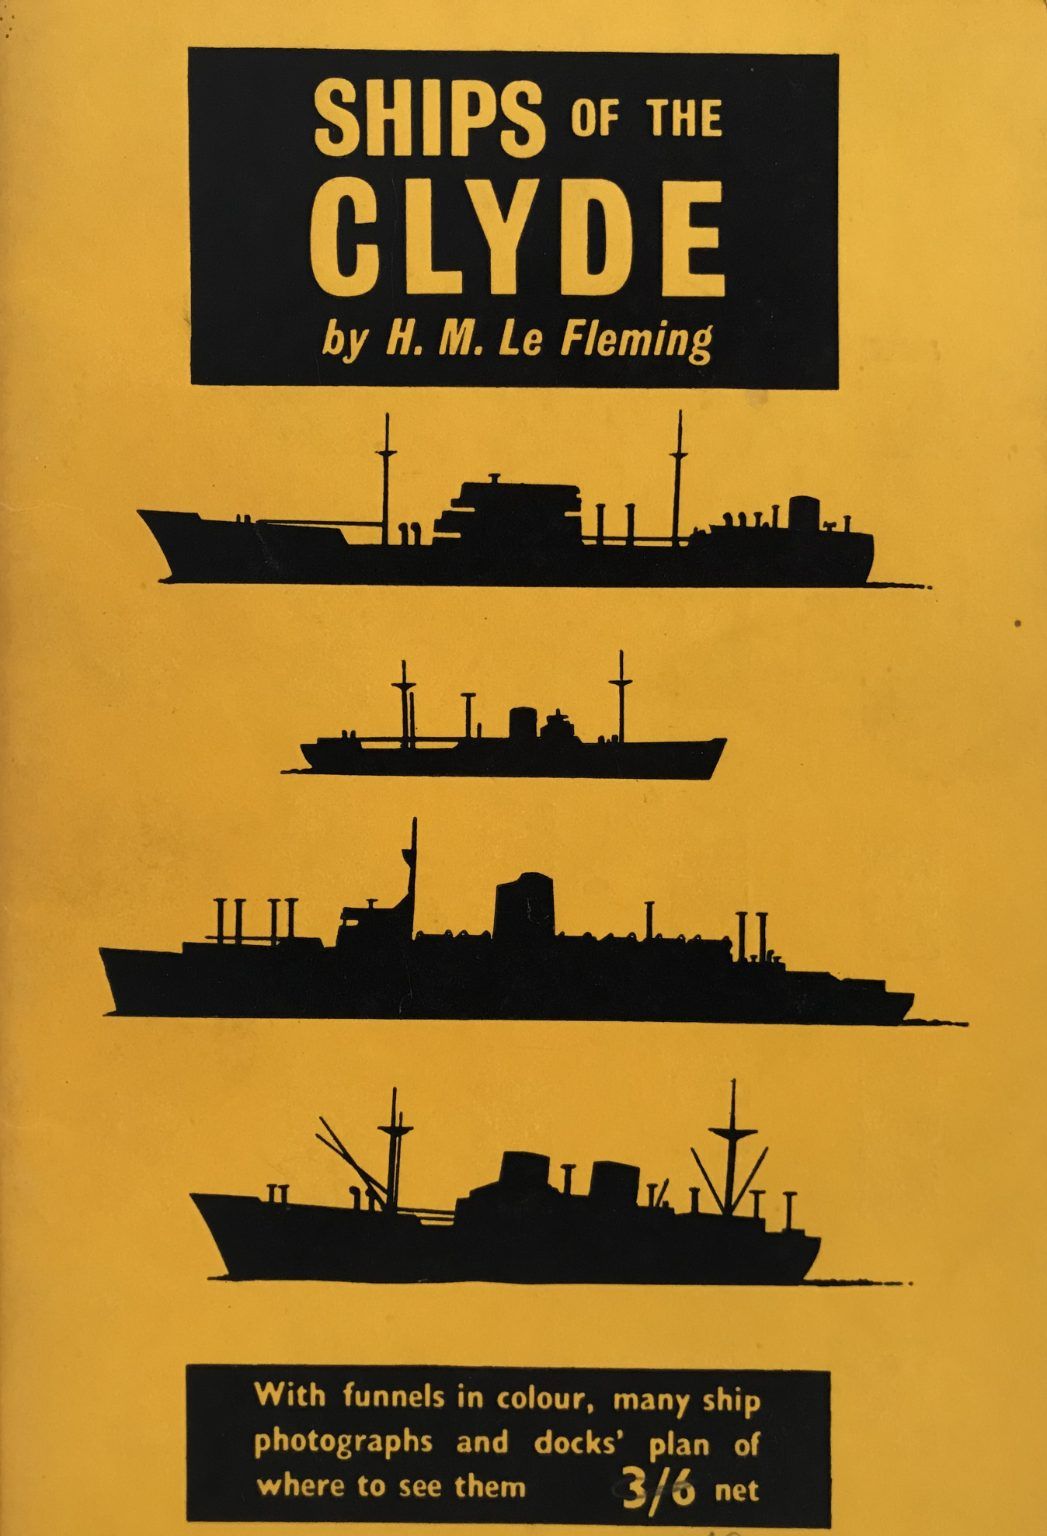 SHIPS OF THE CLYDE